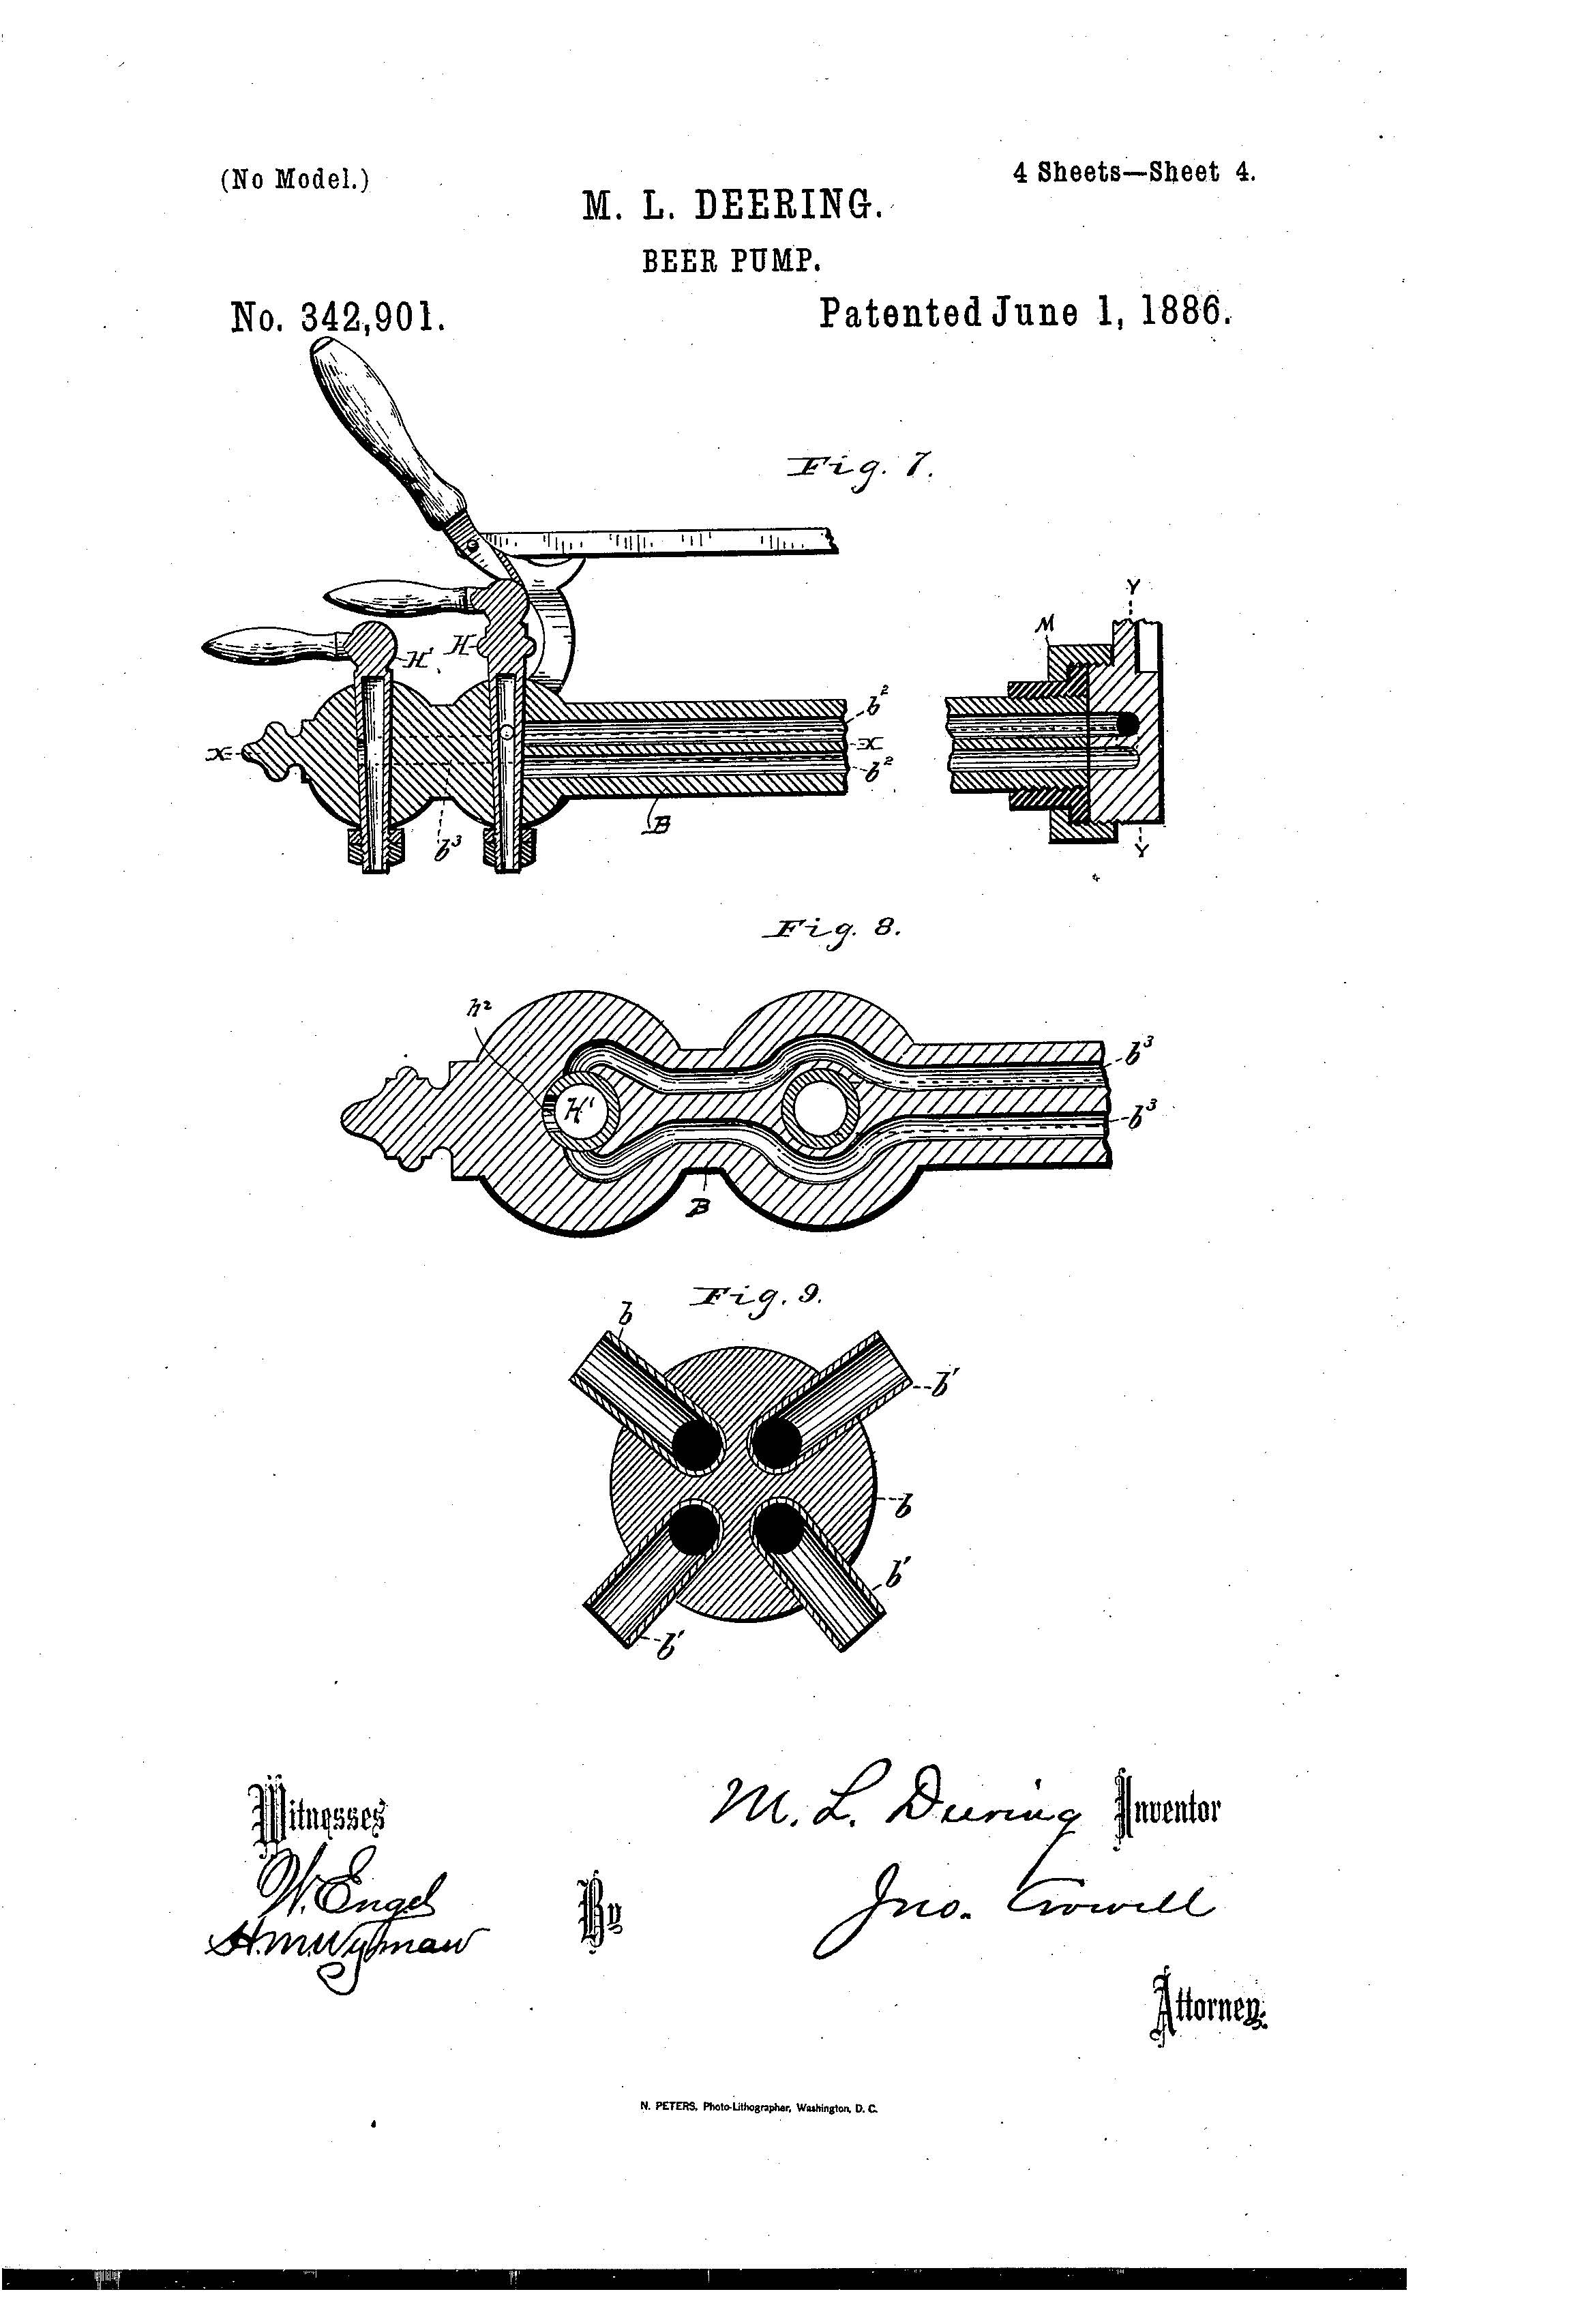 Patent-Illustration-Beer-Pump_Page_4